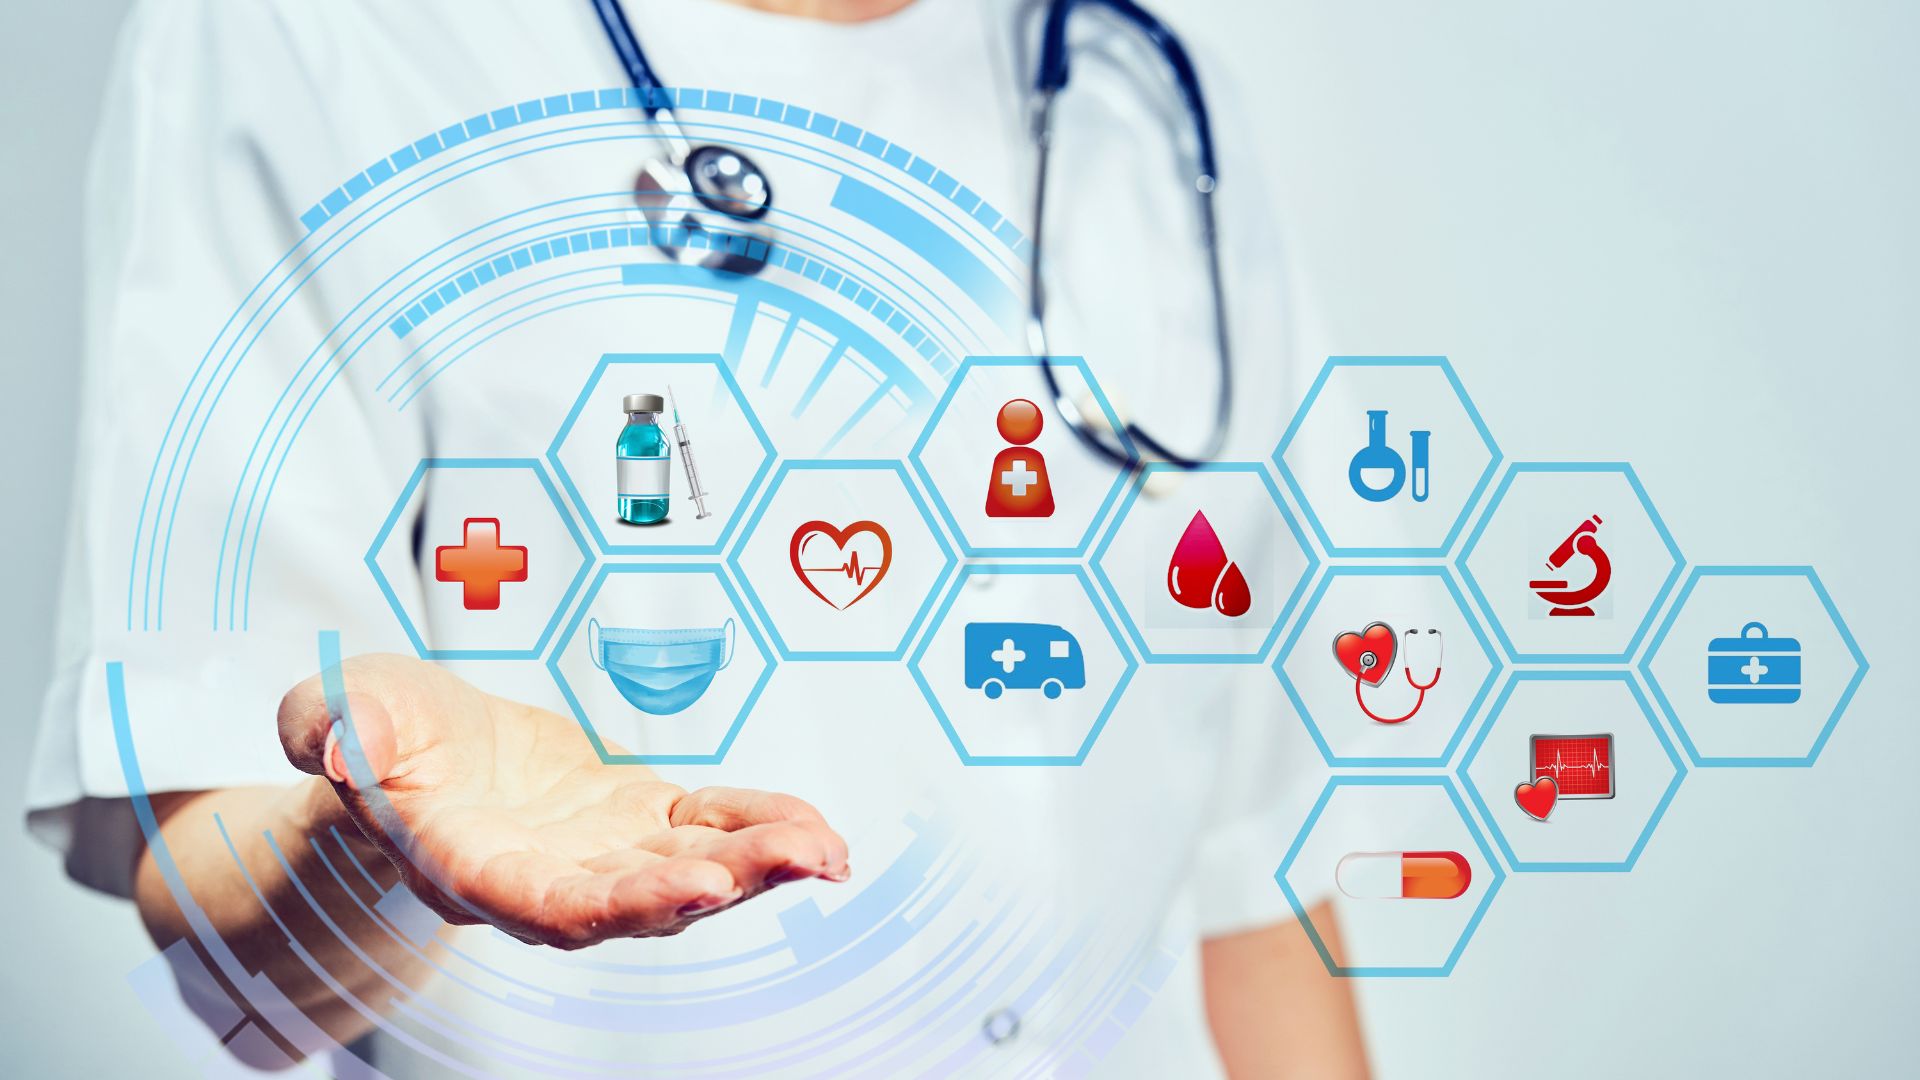 Digital Health Trends to Watch in 2024